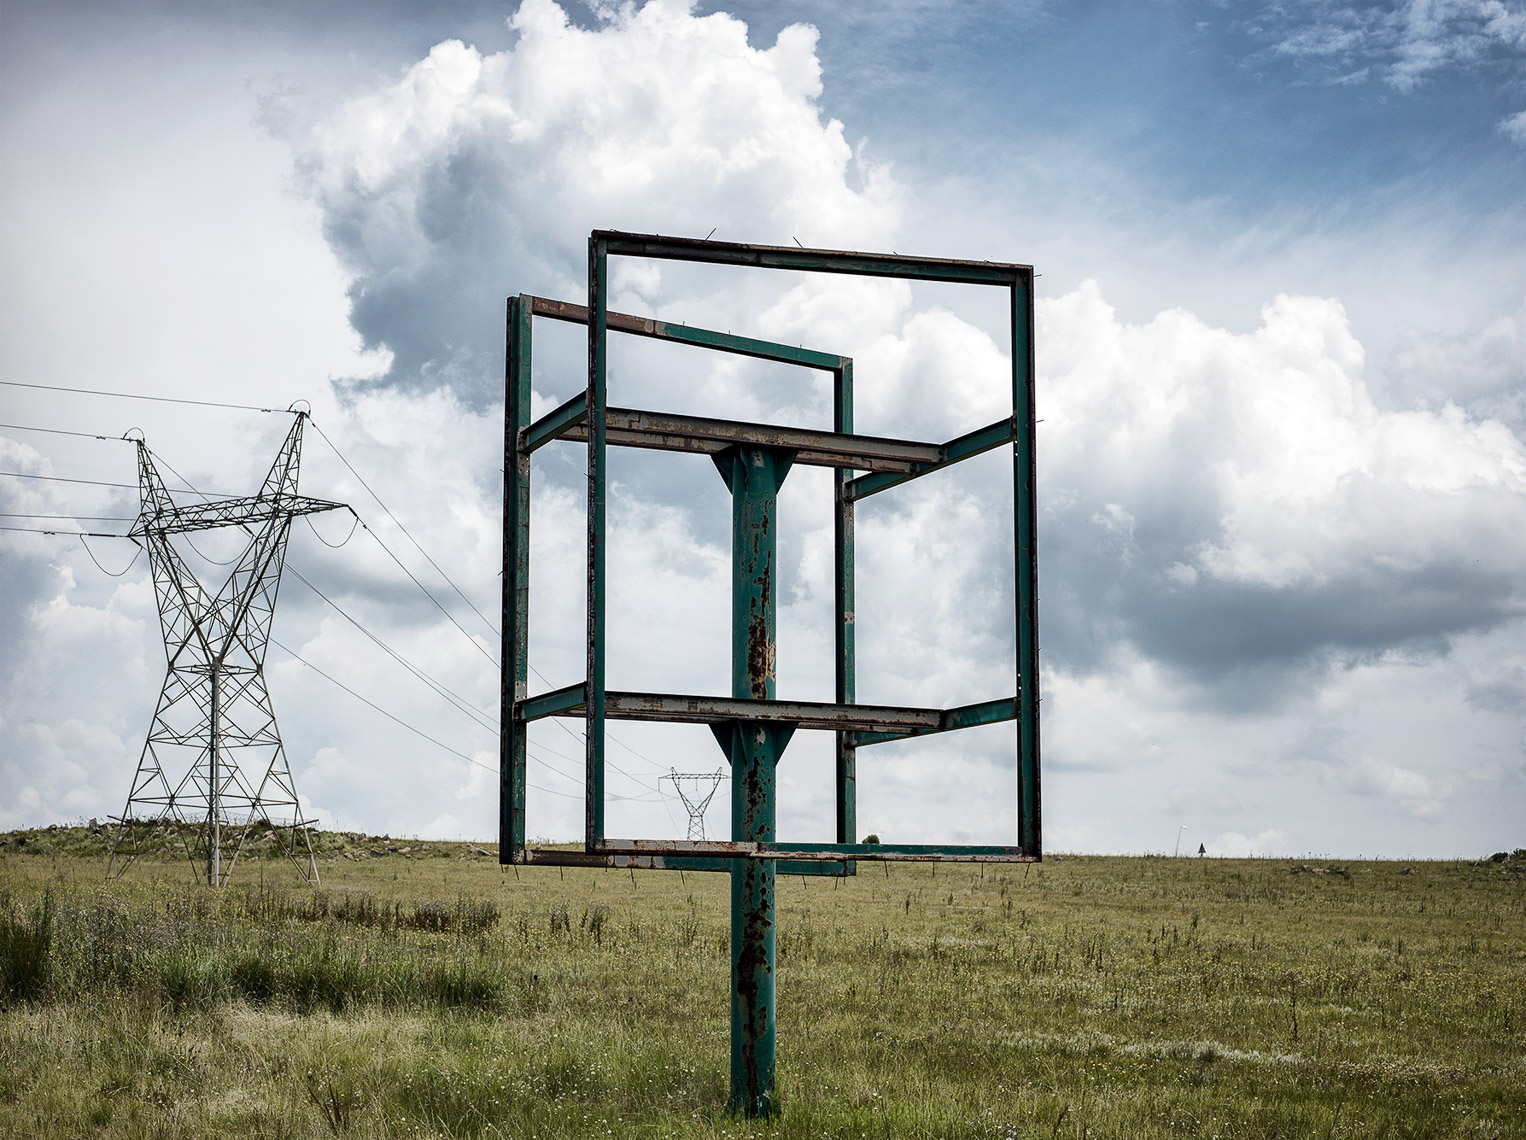 Empty billboard in landscape with electrical pylons in the background. 